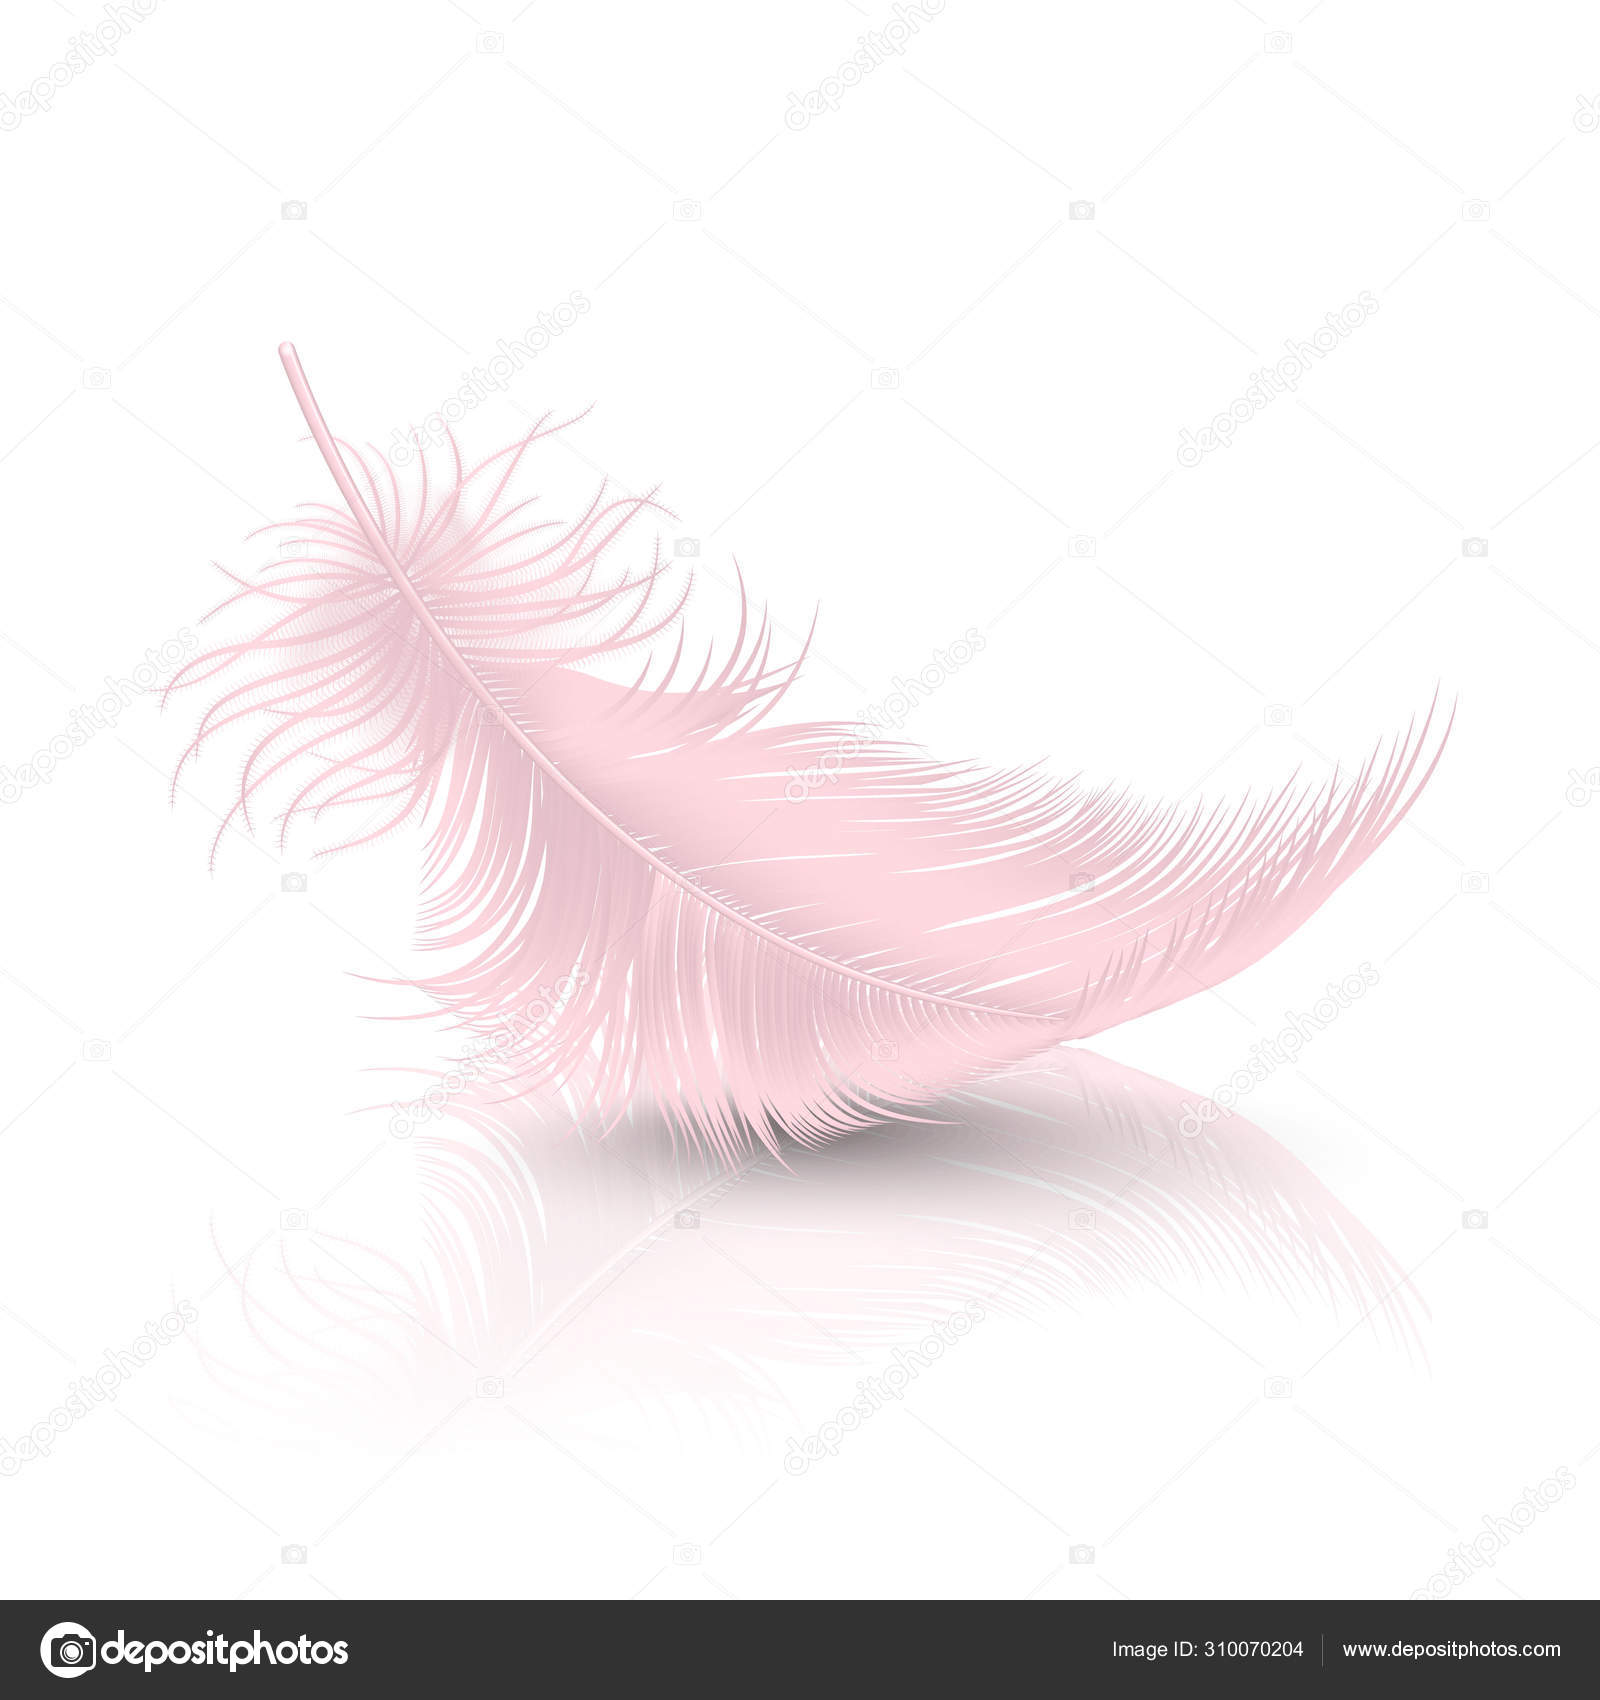 Closeup Pink Feathers Background Stock Image - Image of effortless